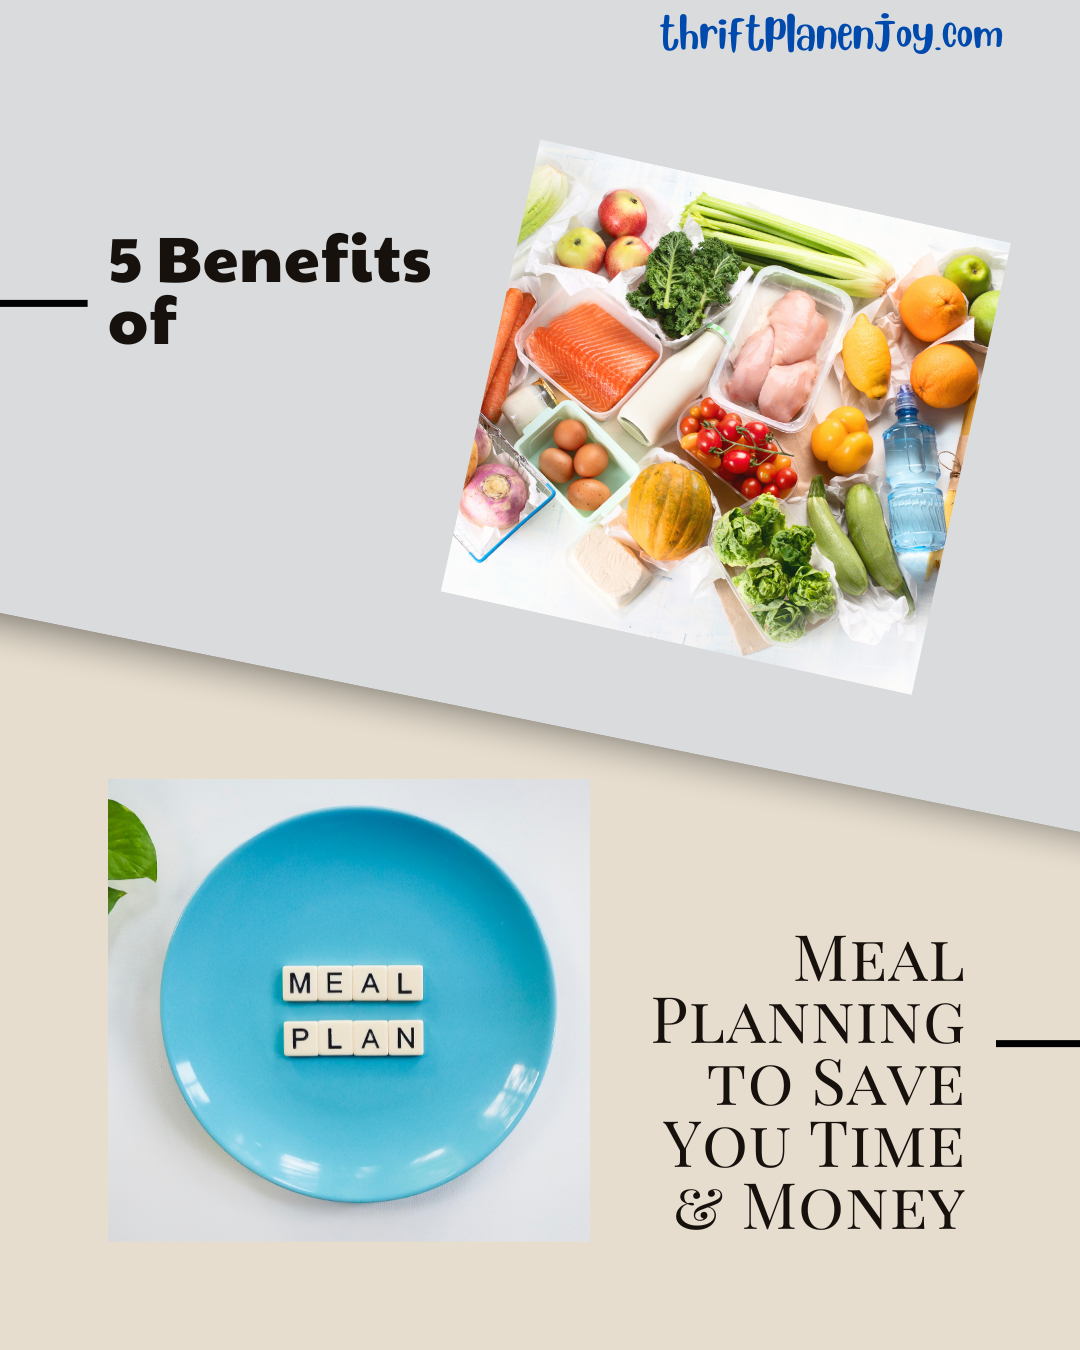 5 Benefits of Meal Planning to Save You Time & Money